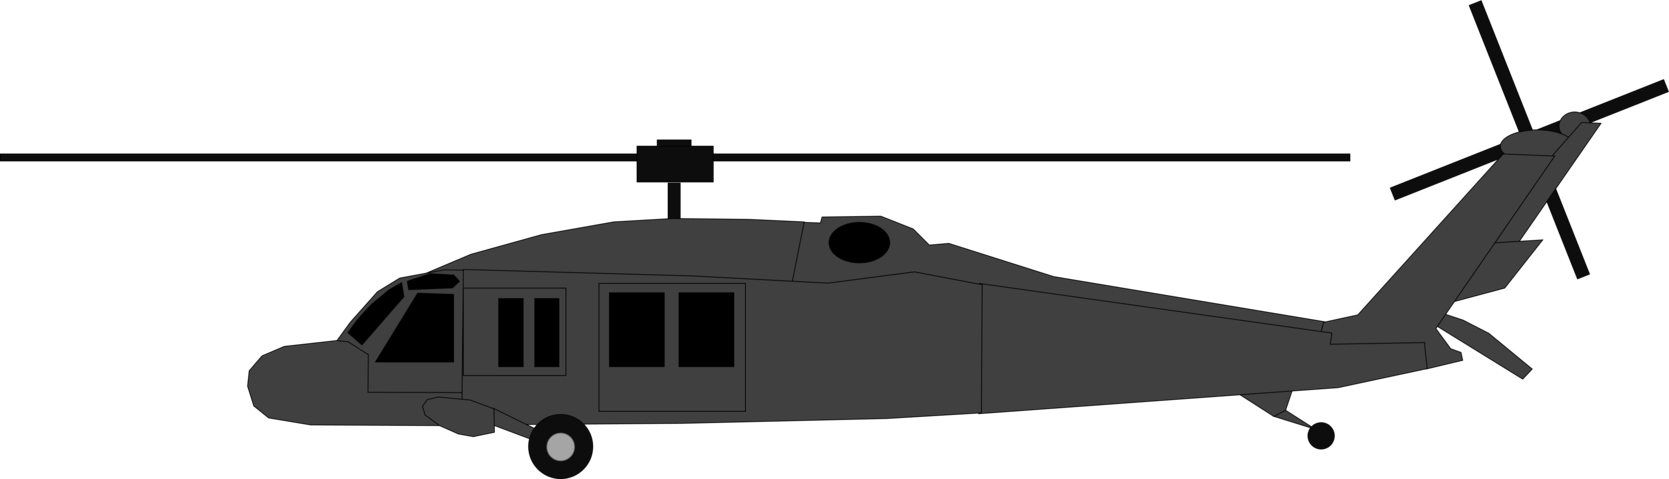 helicopter clipart black hawk helicopter